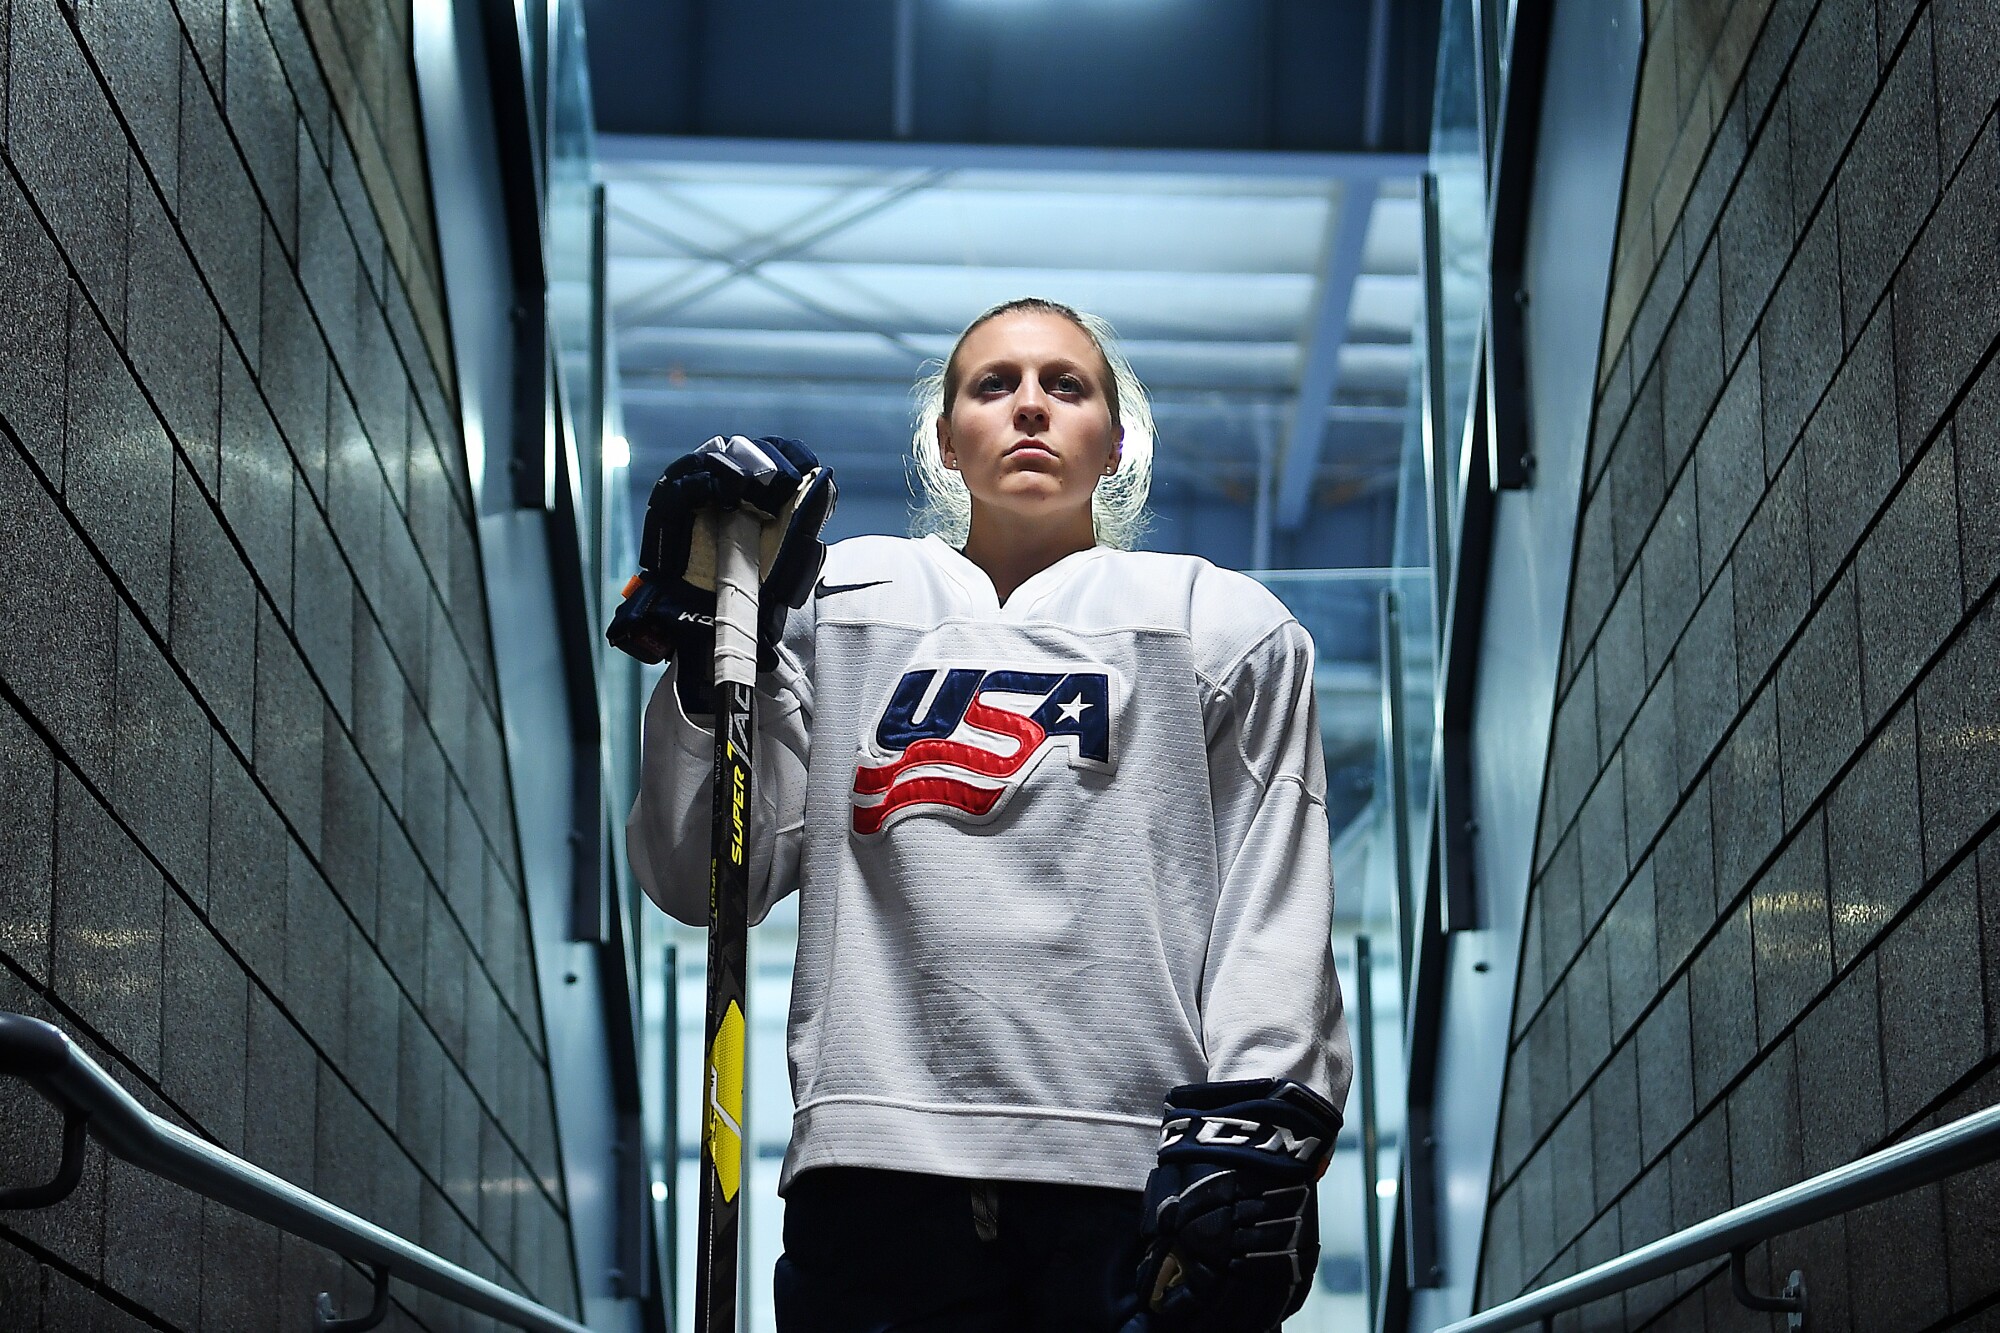 Kendall Coyne Schofield has won two medals at the Olympics as a member of the U.S. women's hockey team.